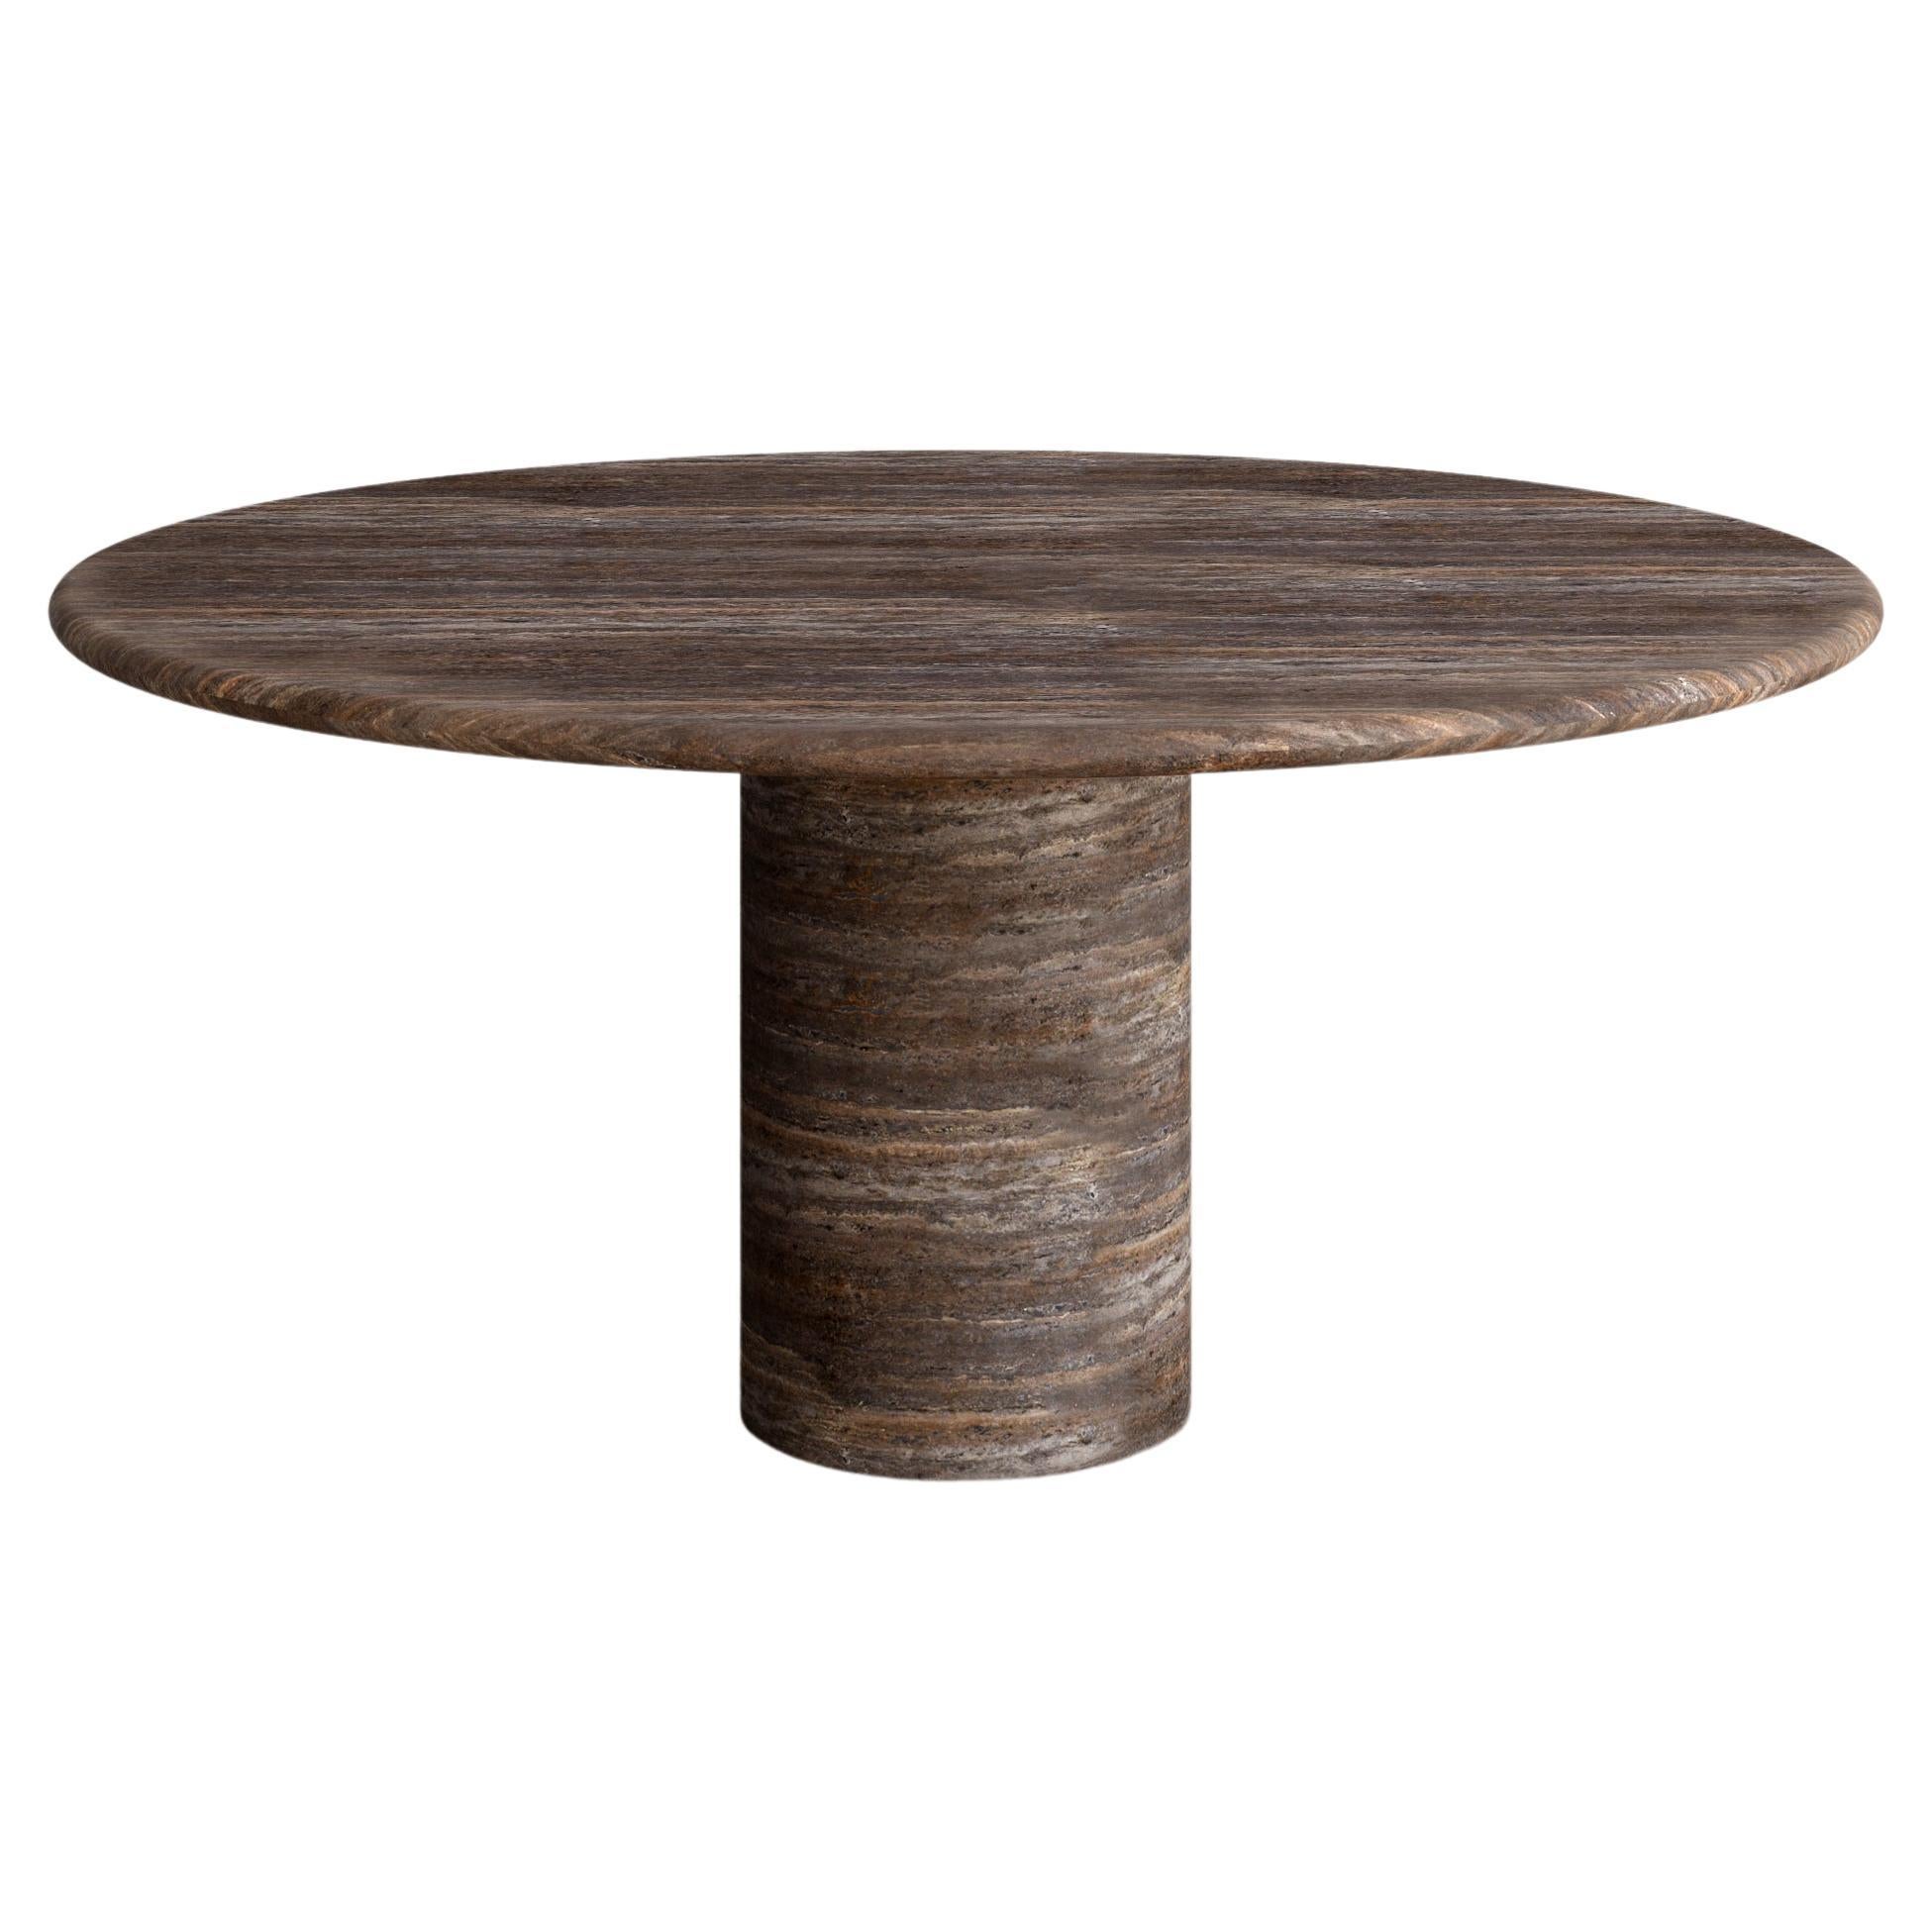 Cacao Travertine Voyage Dining Table i by the Essentialist For Sale